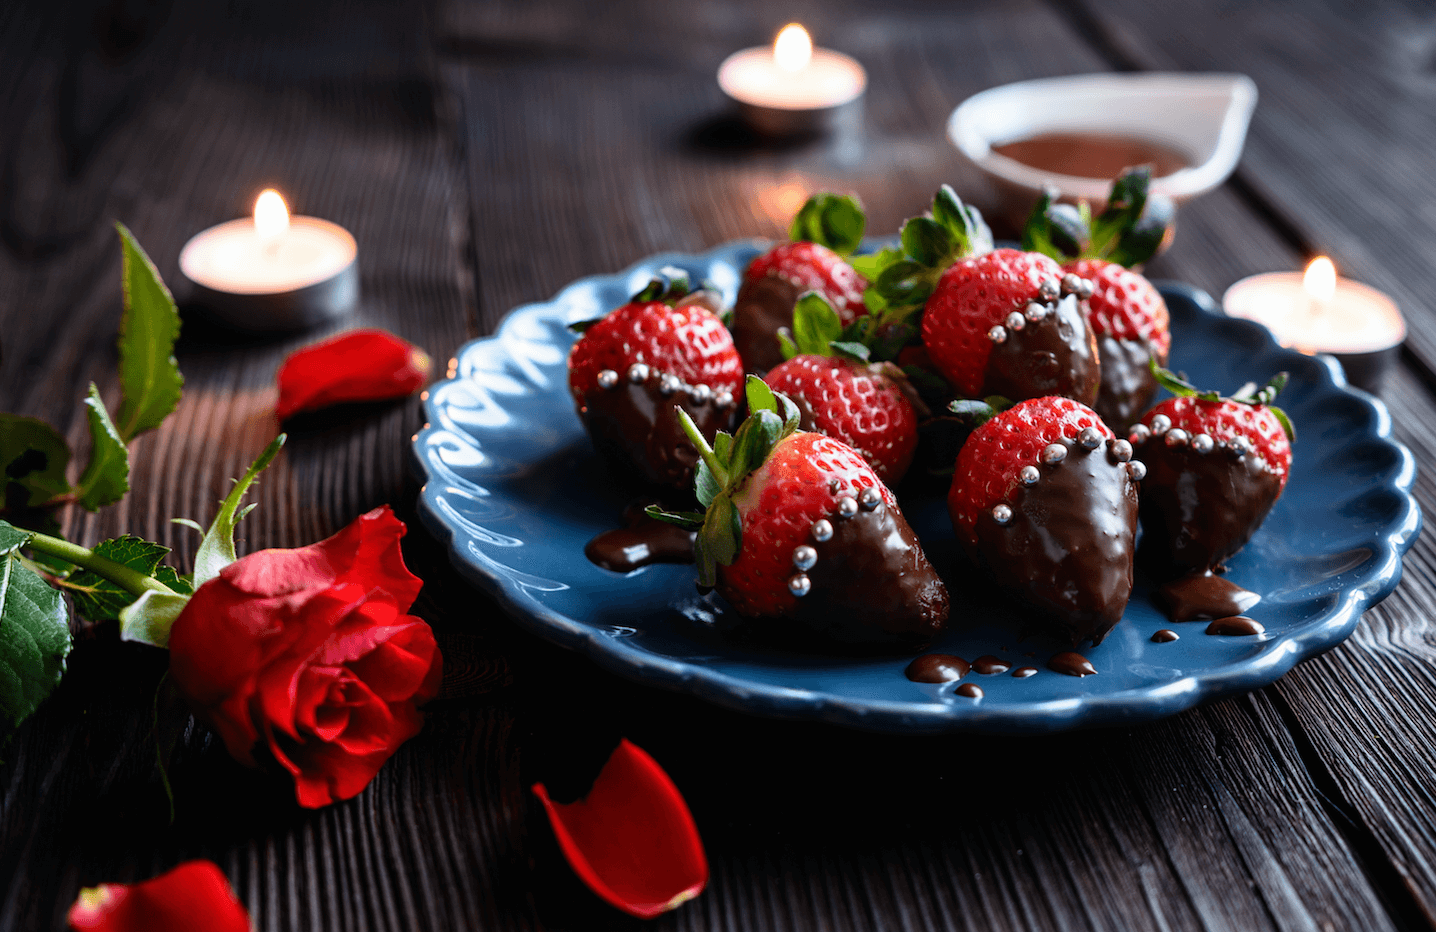 We Can Heart-ly Wait For Valentine’s Day at Union Wharf